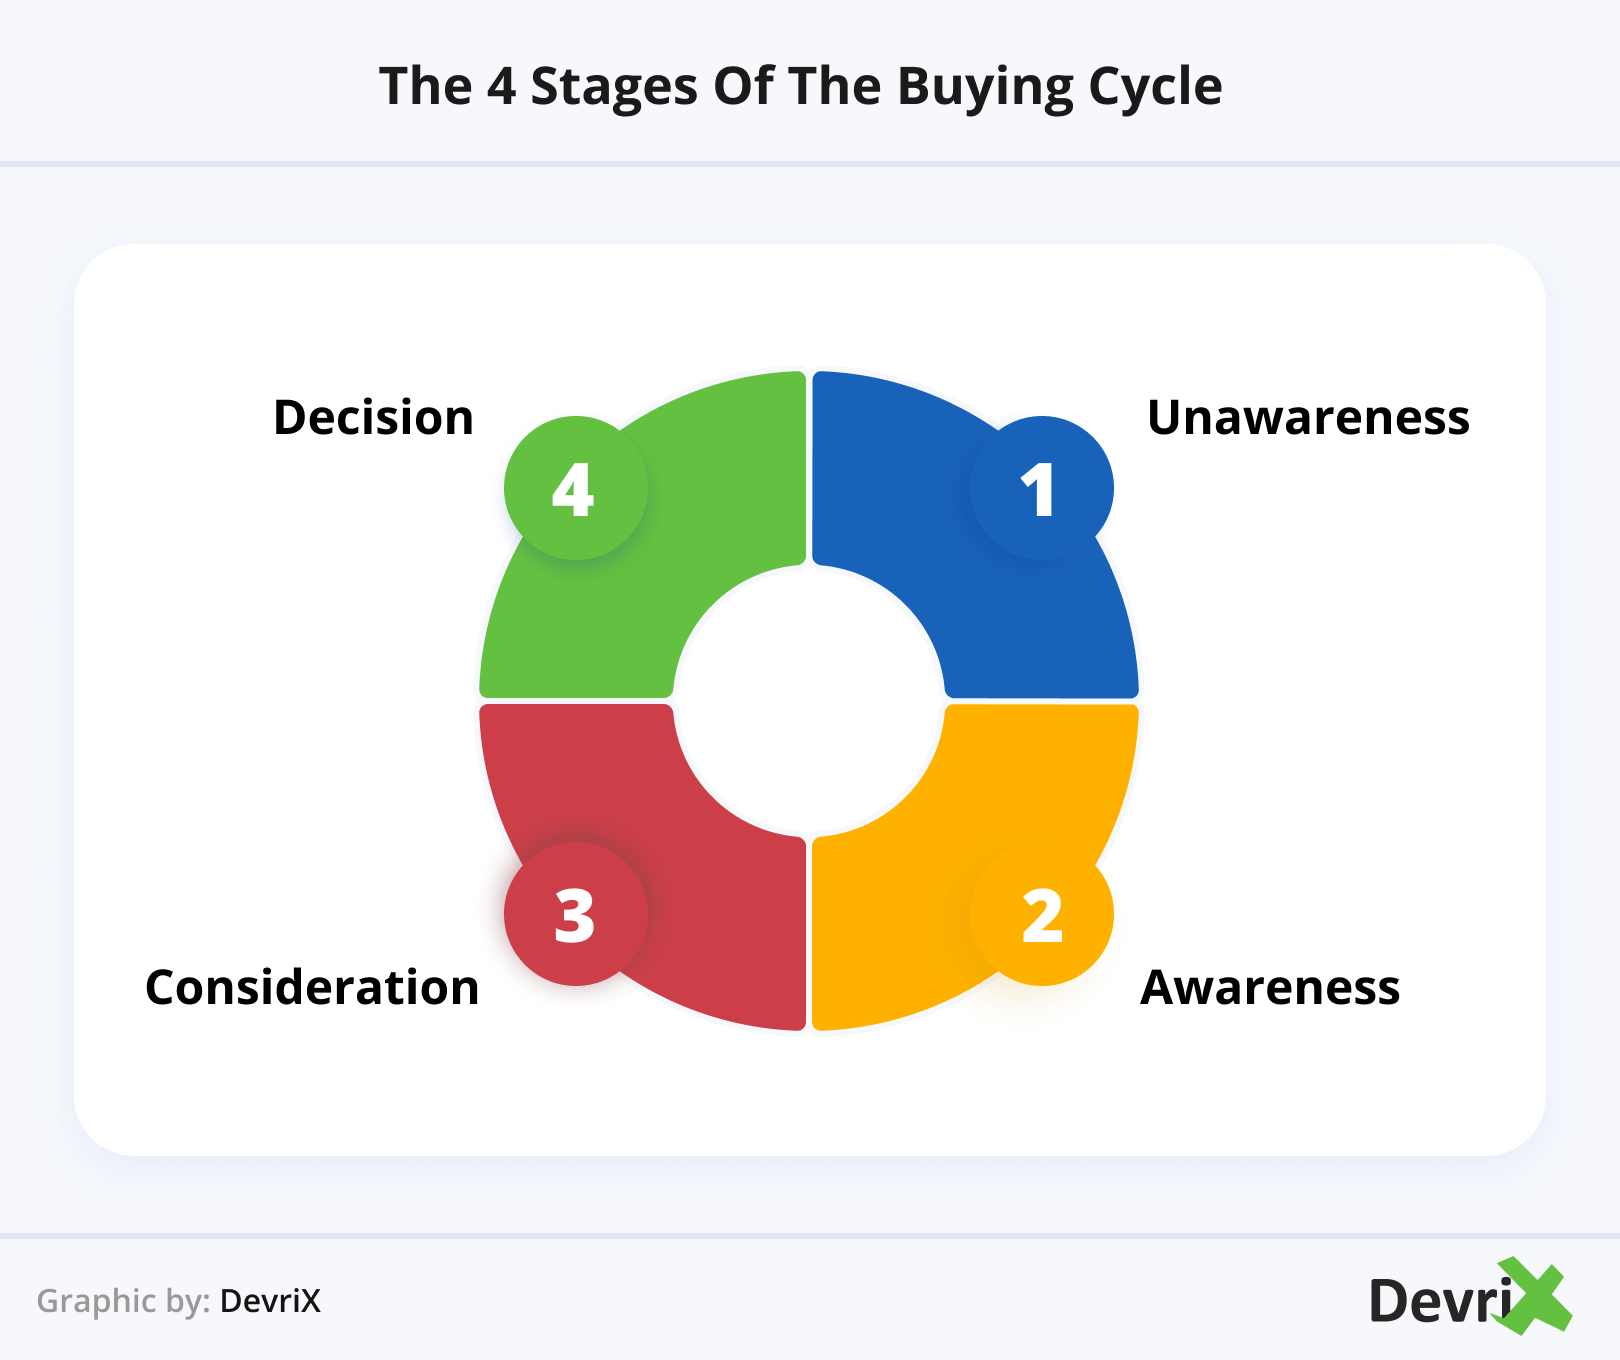 The 4 Stages of the Buying Cycle